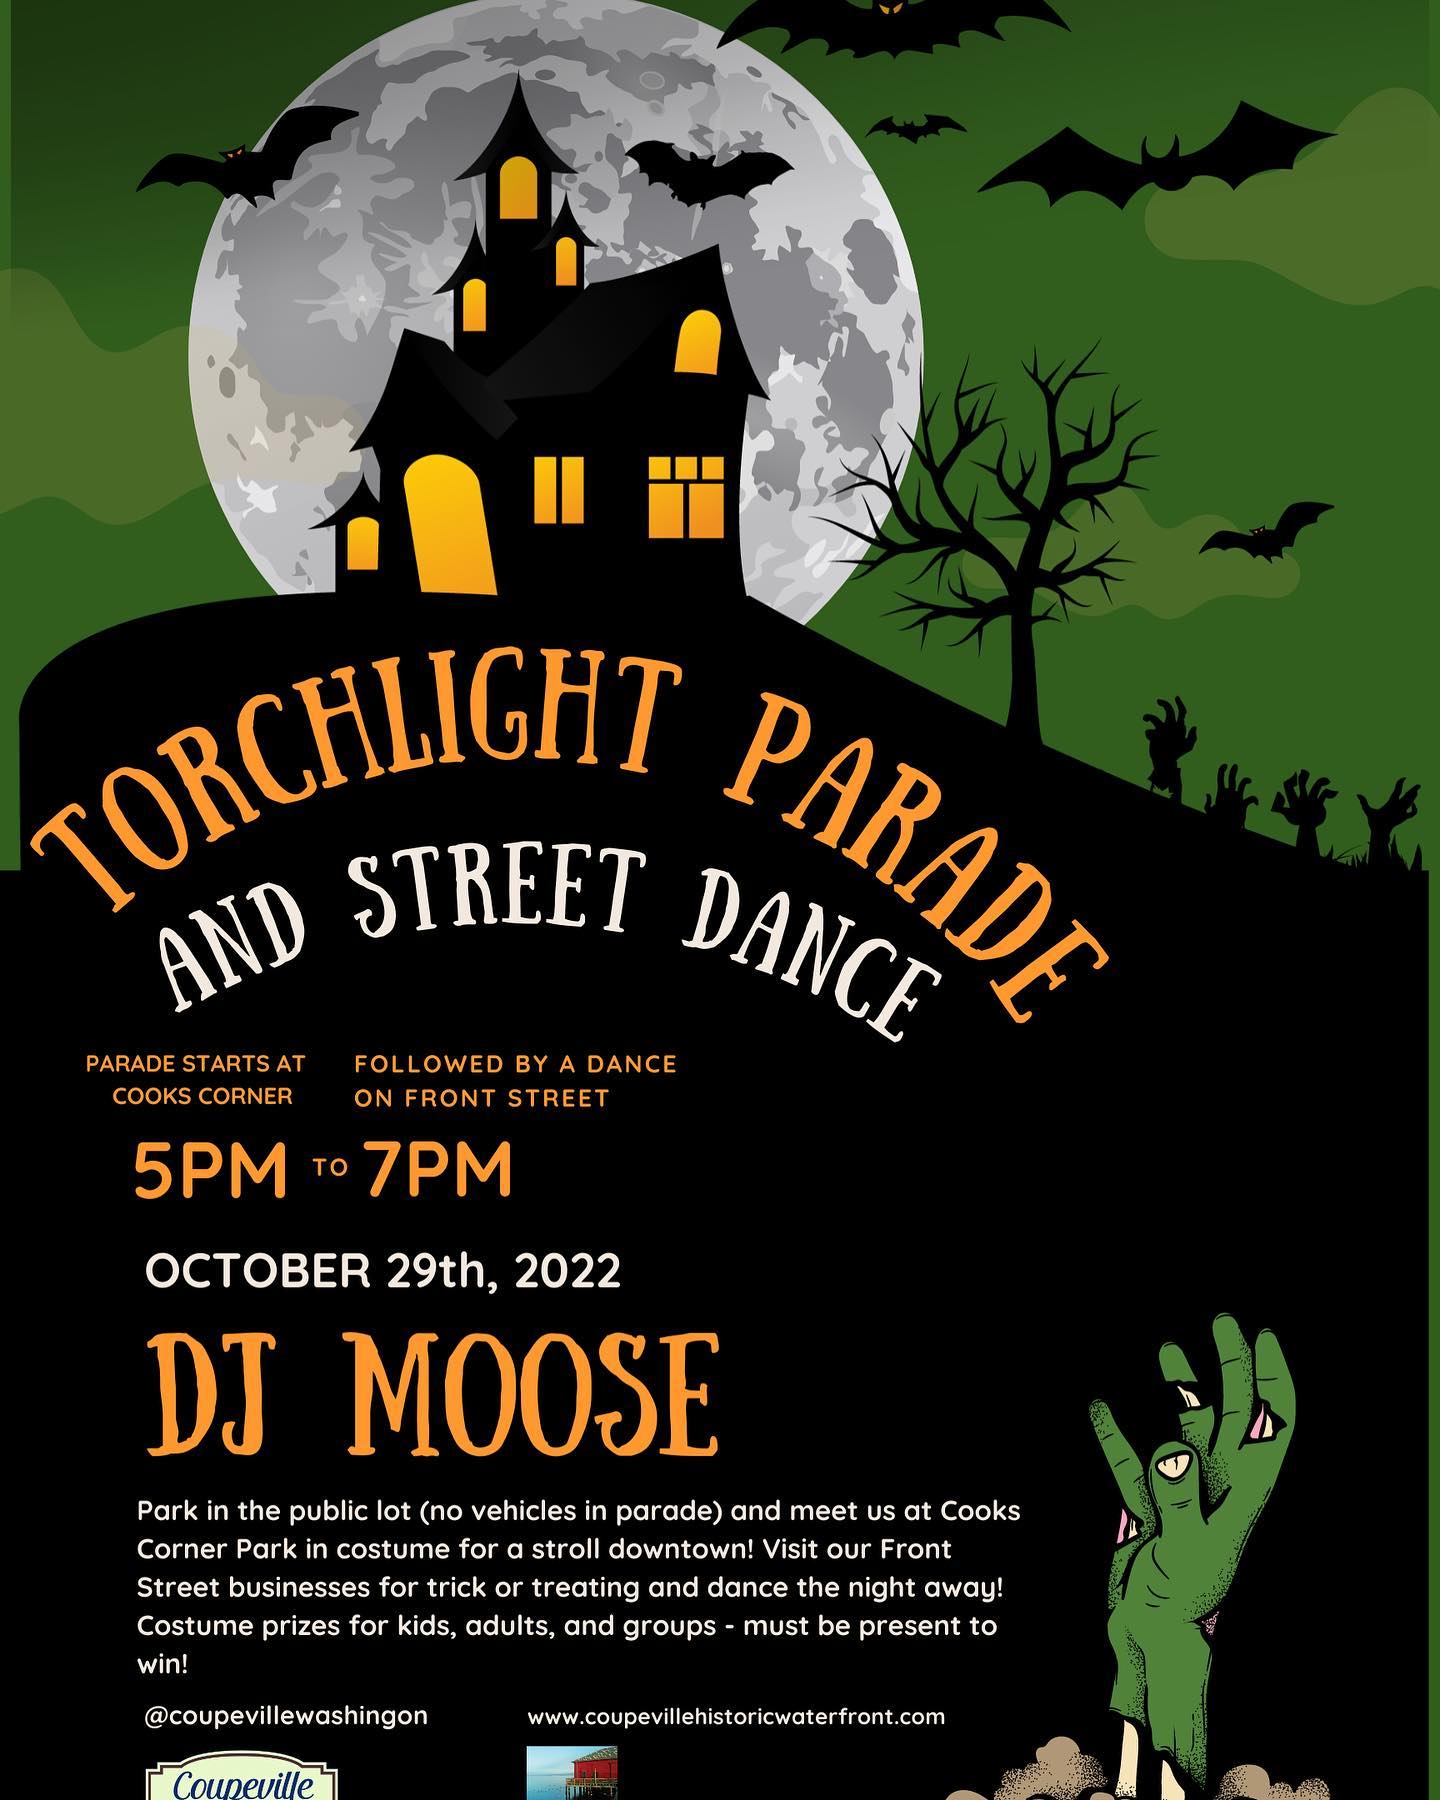 Torchlight Parade and Street Dance Whidbey Island Halloween Events